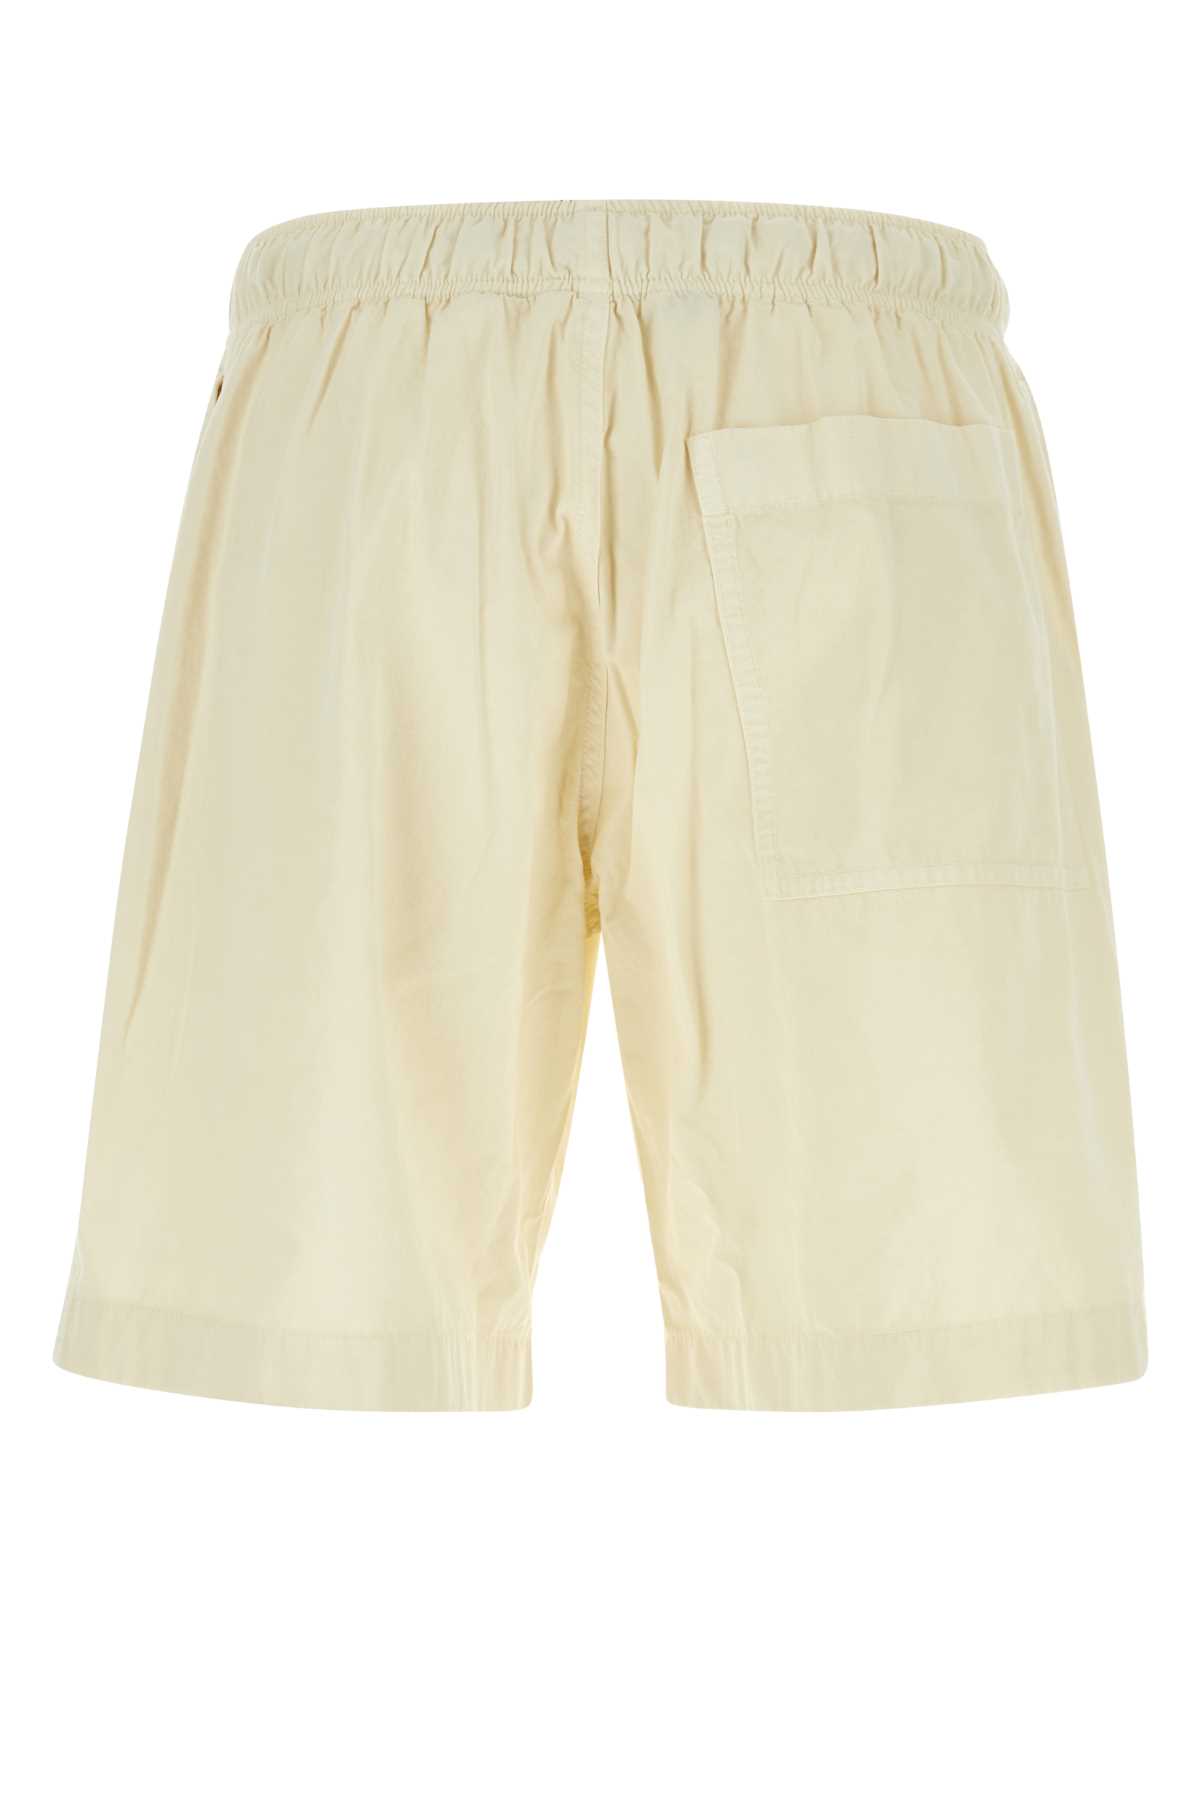 Palm Angels Ivory Cotton Bermuda Shorts In Offwhite